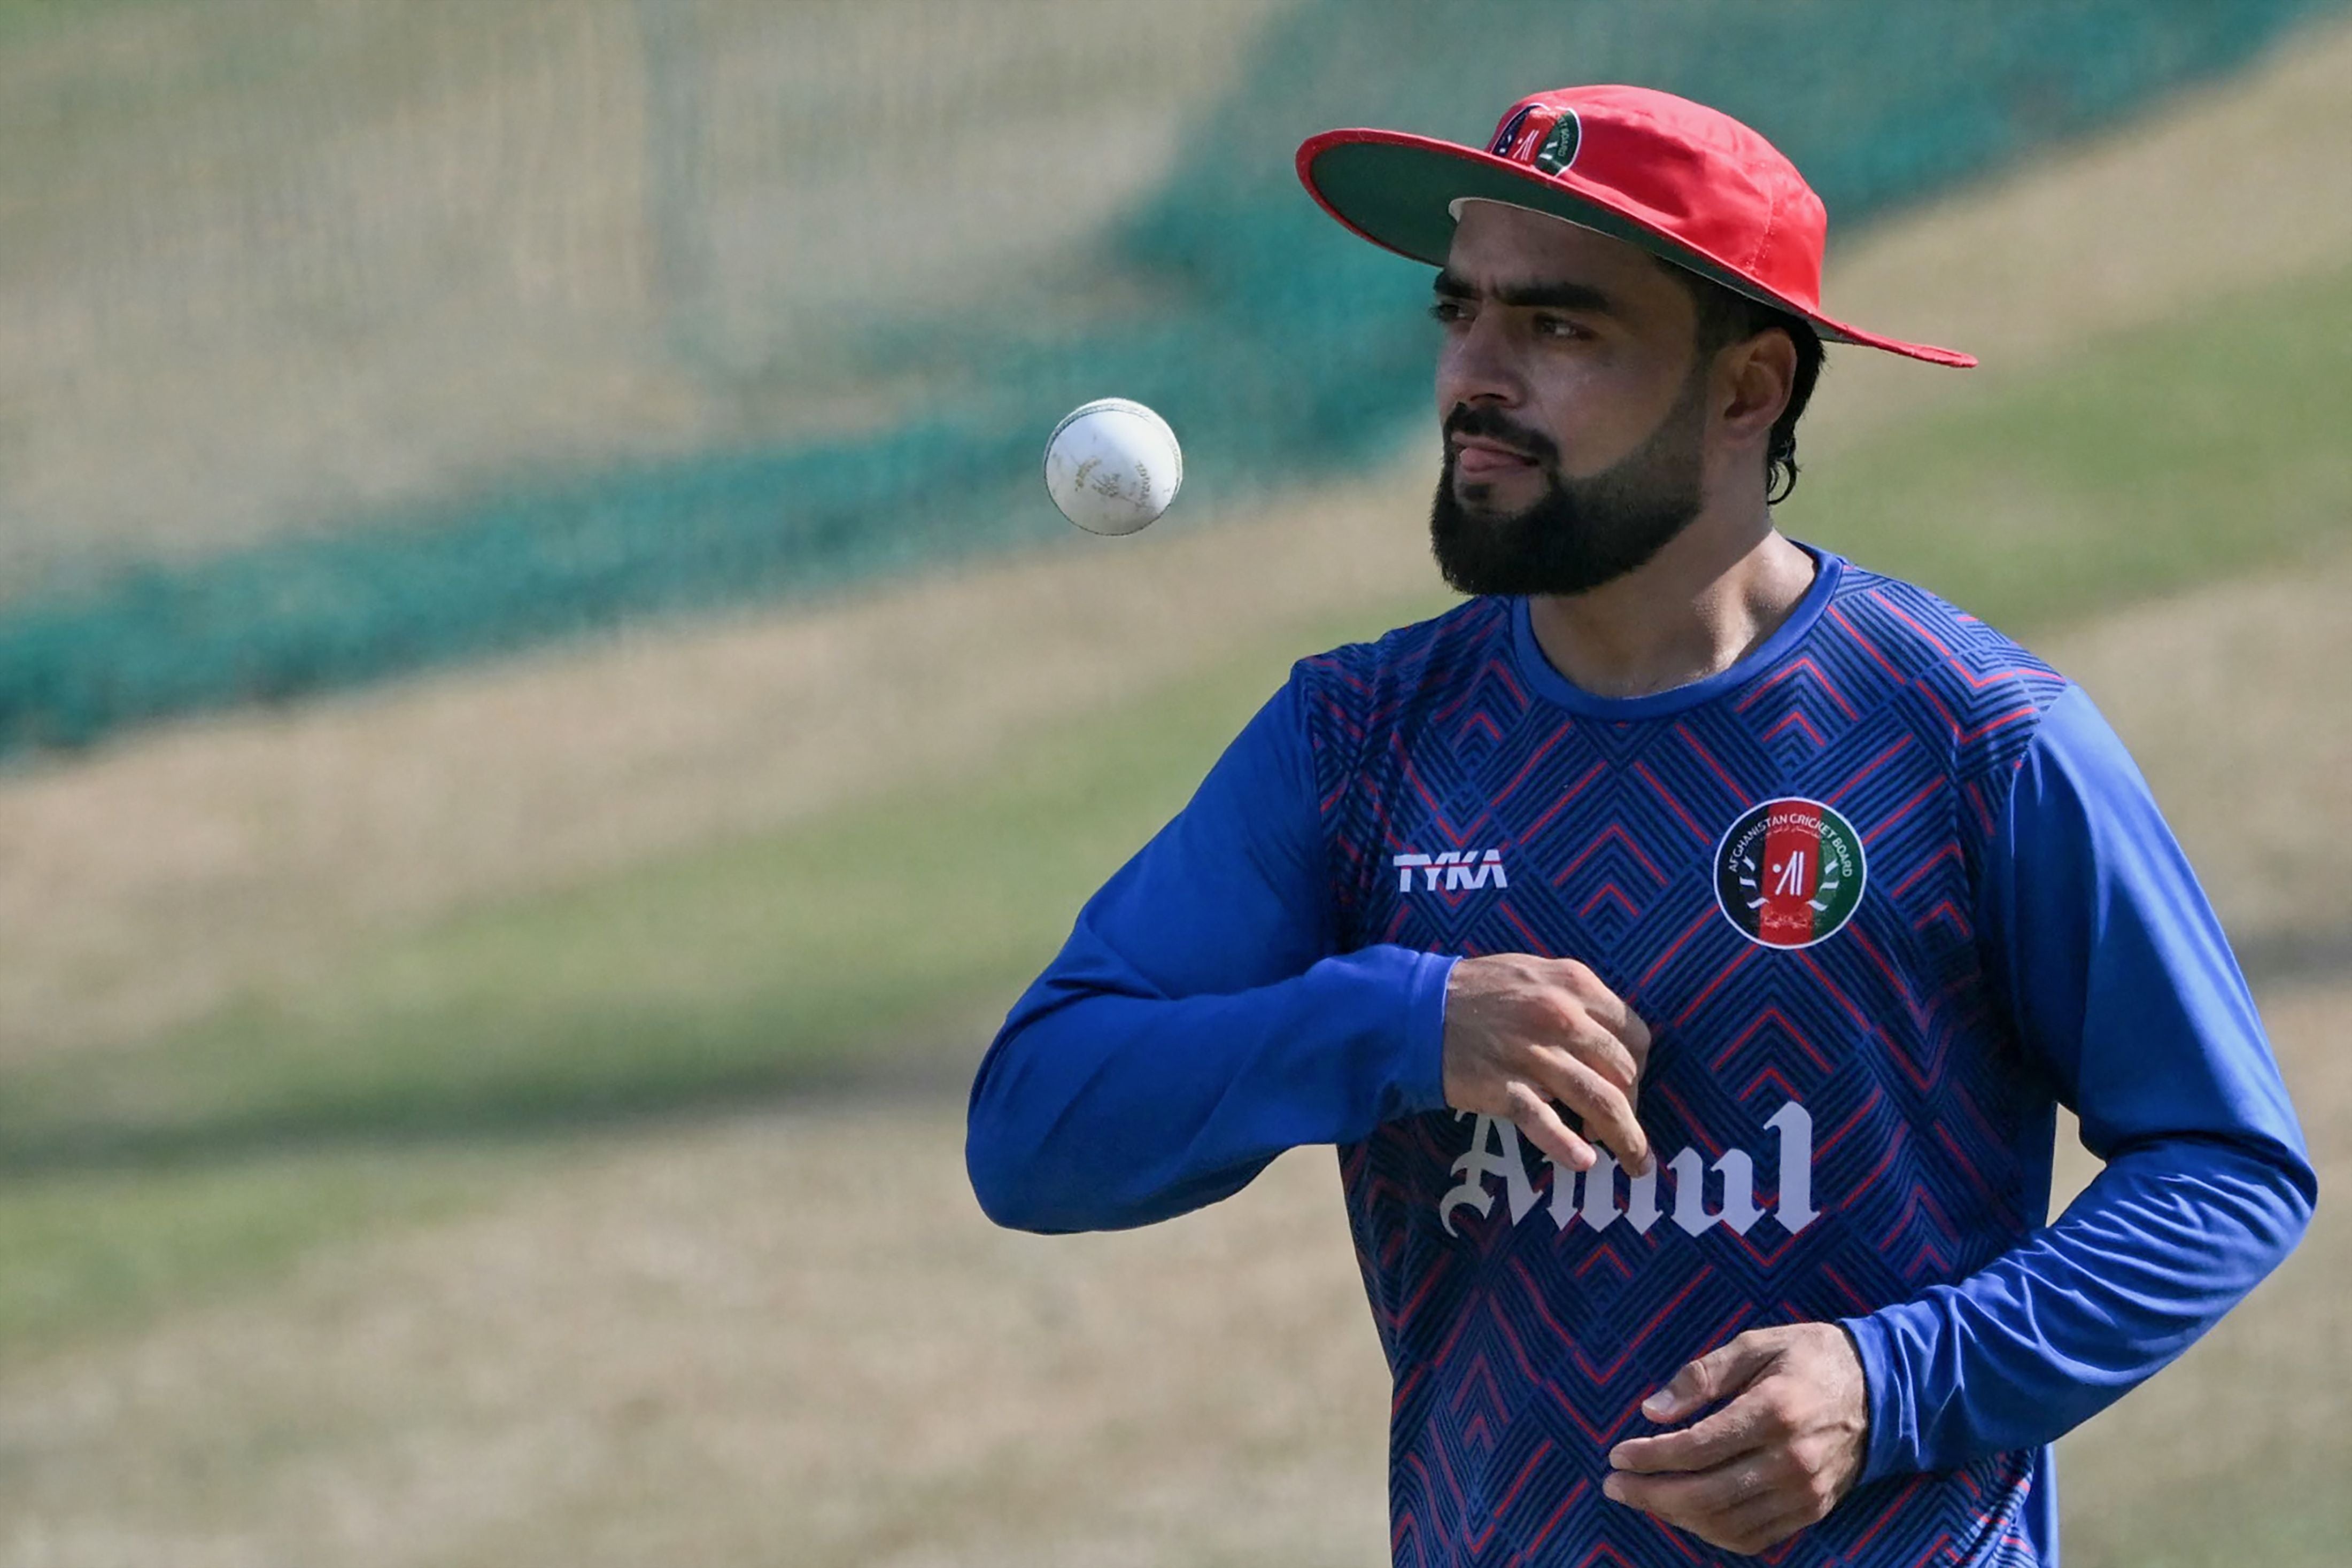 Afghanistan’s Rashid Khan spins the ball during a practice session on the eve of their 2023 ICC men’s cricket World Cup one-day international (ODI) match against Bangladesh at the Himachal Pradesh Cricket Association Stadium in Dharamsala on 6 October